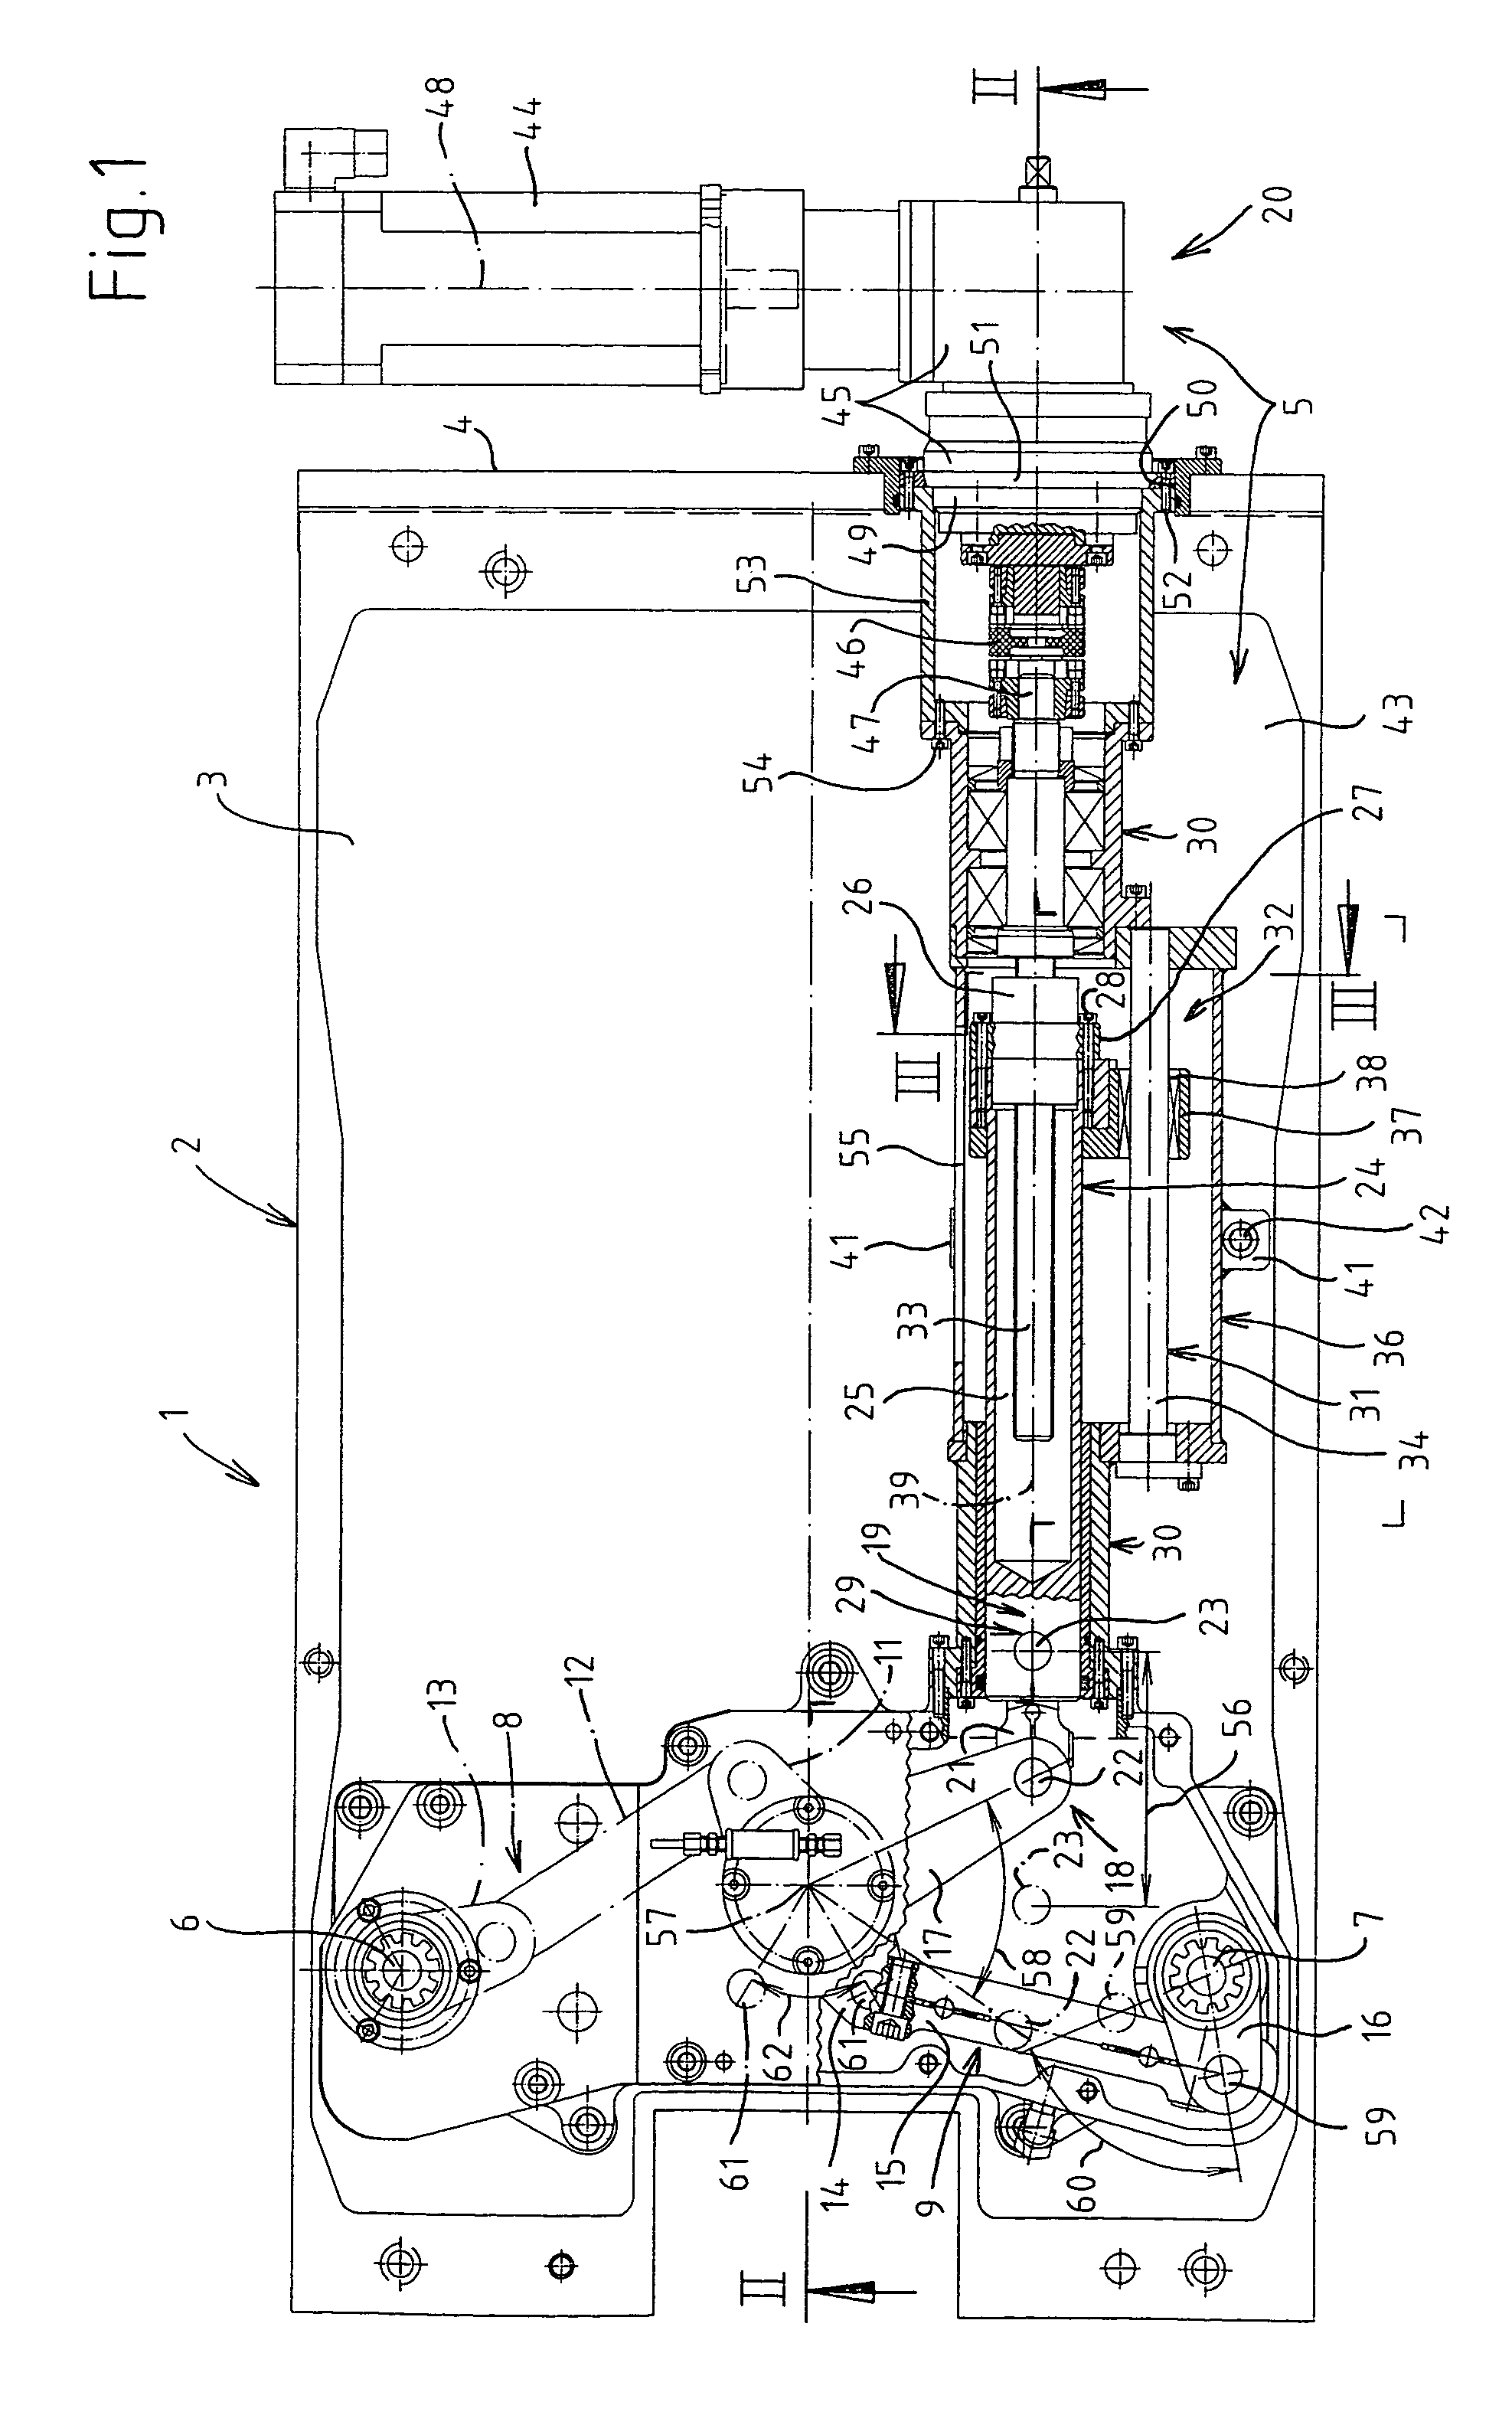 Device for closing and opening the mold halves of a glass molding machine